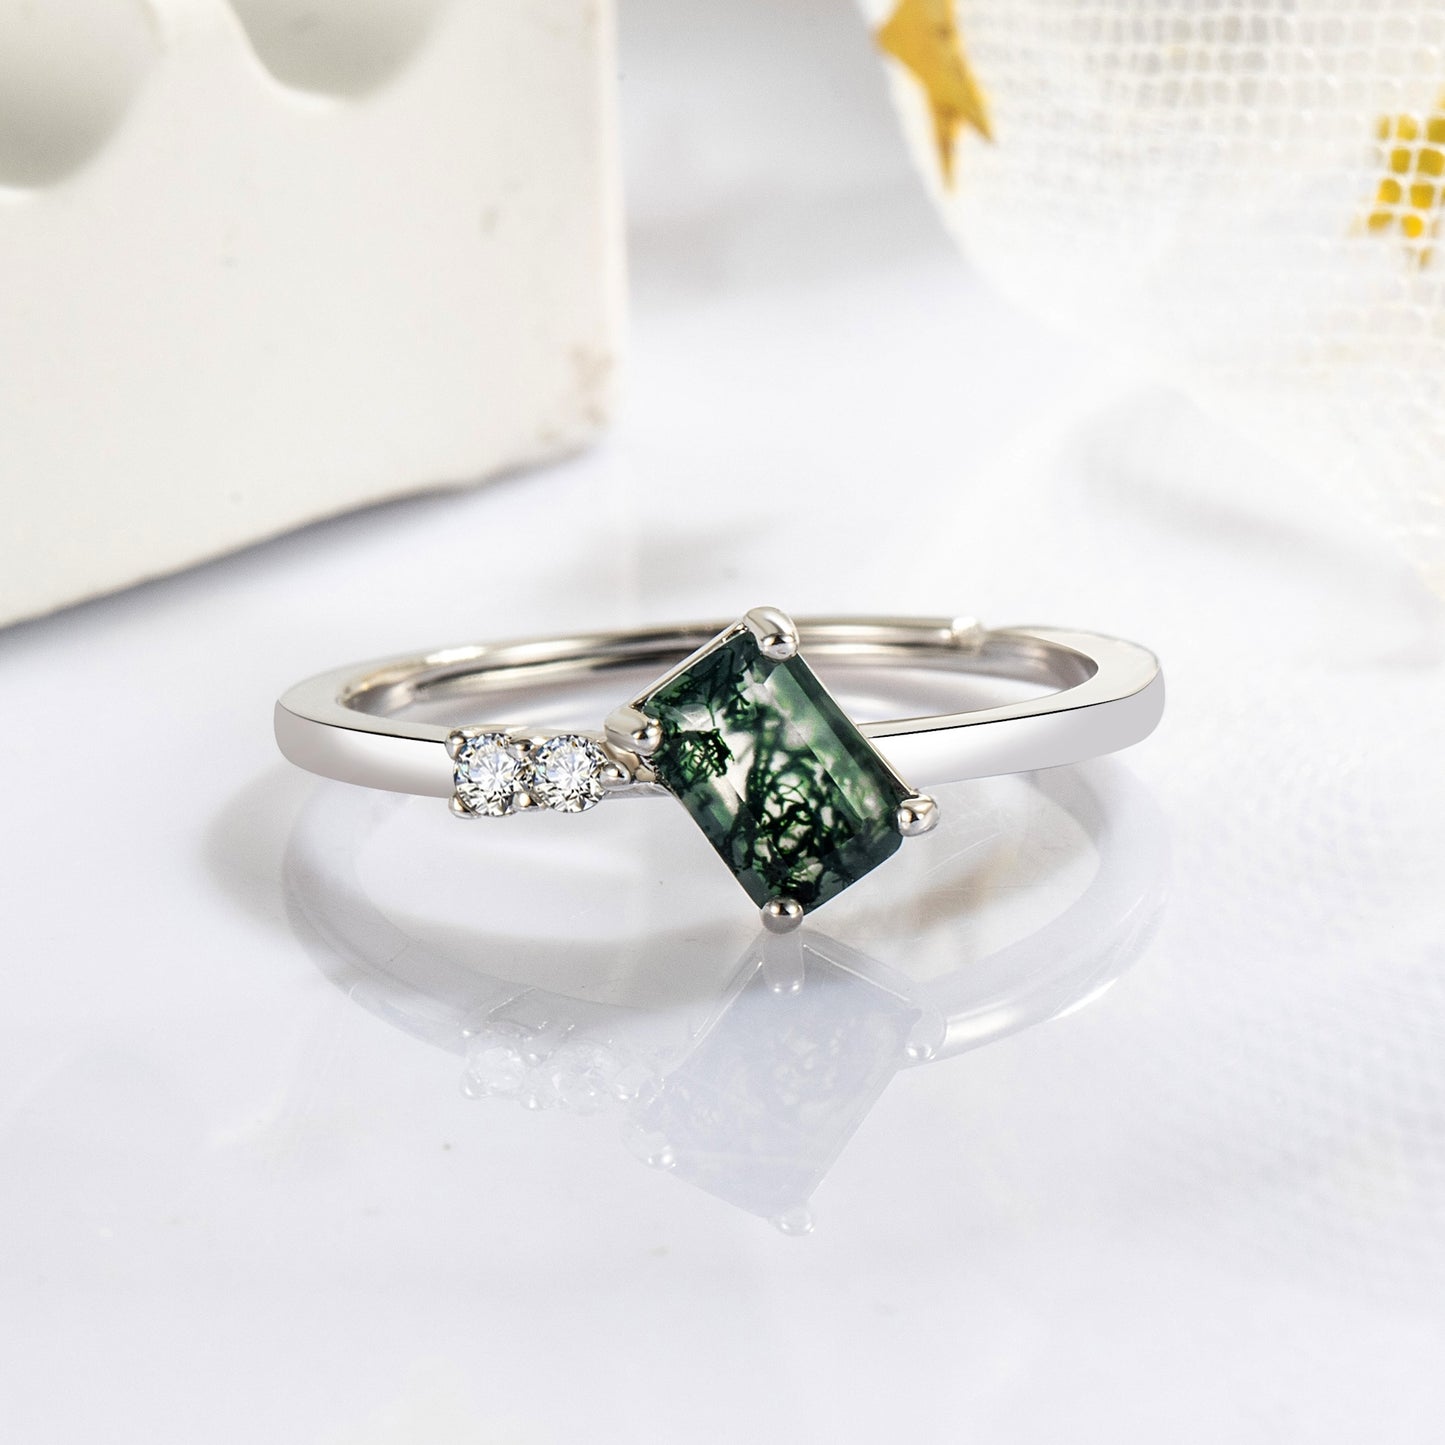 Baguette Moss Agate S925 Silver Couple Ring Set